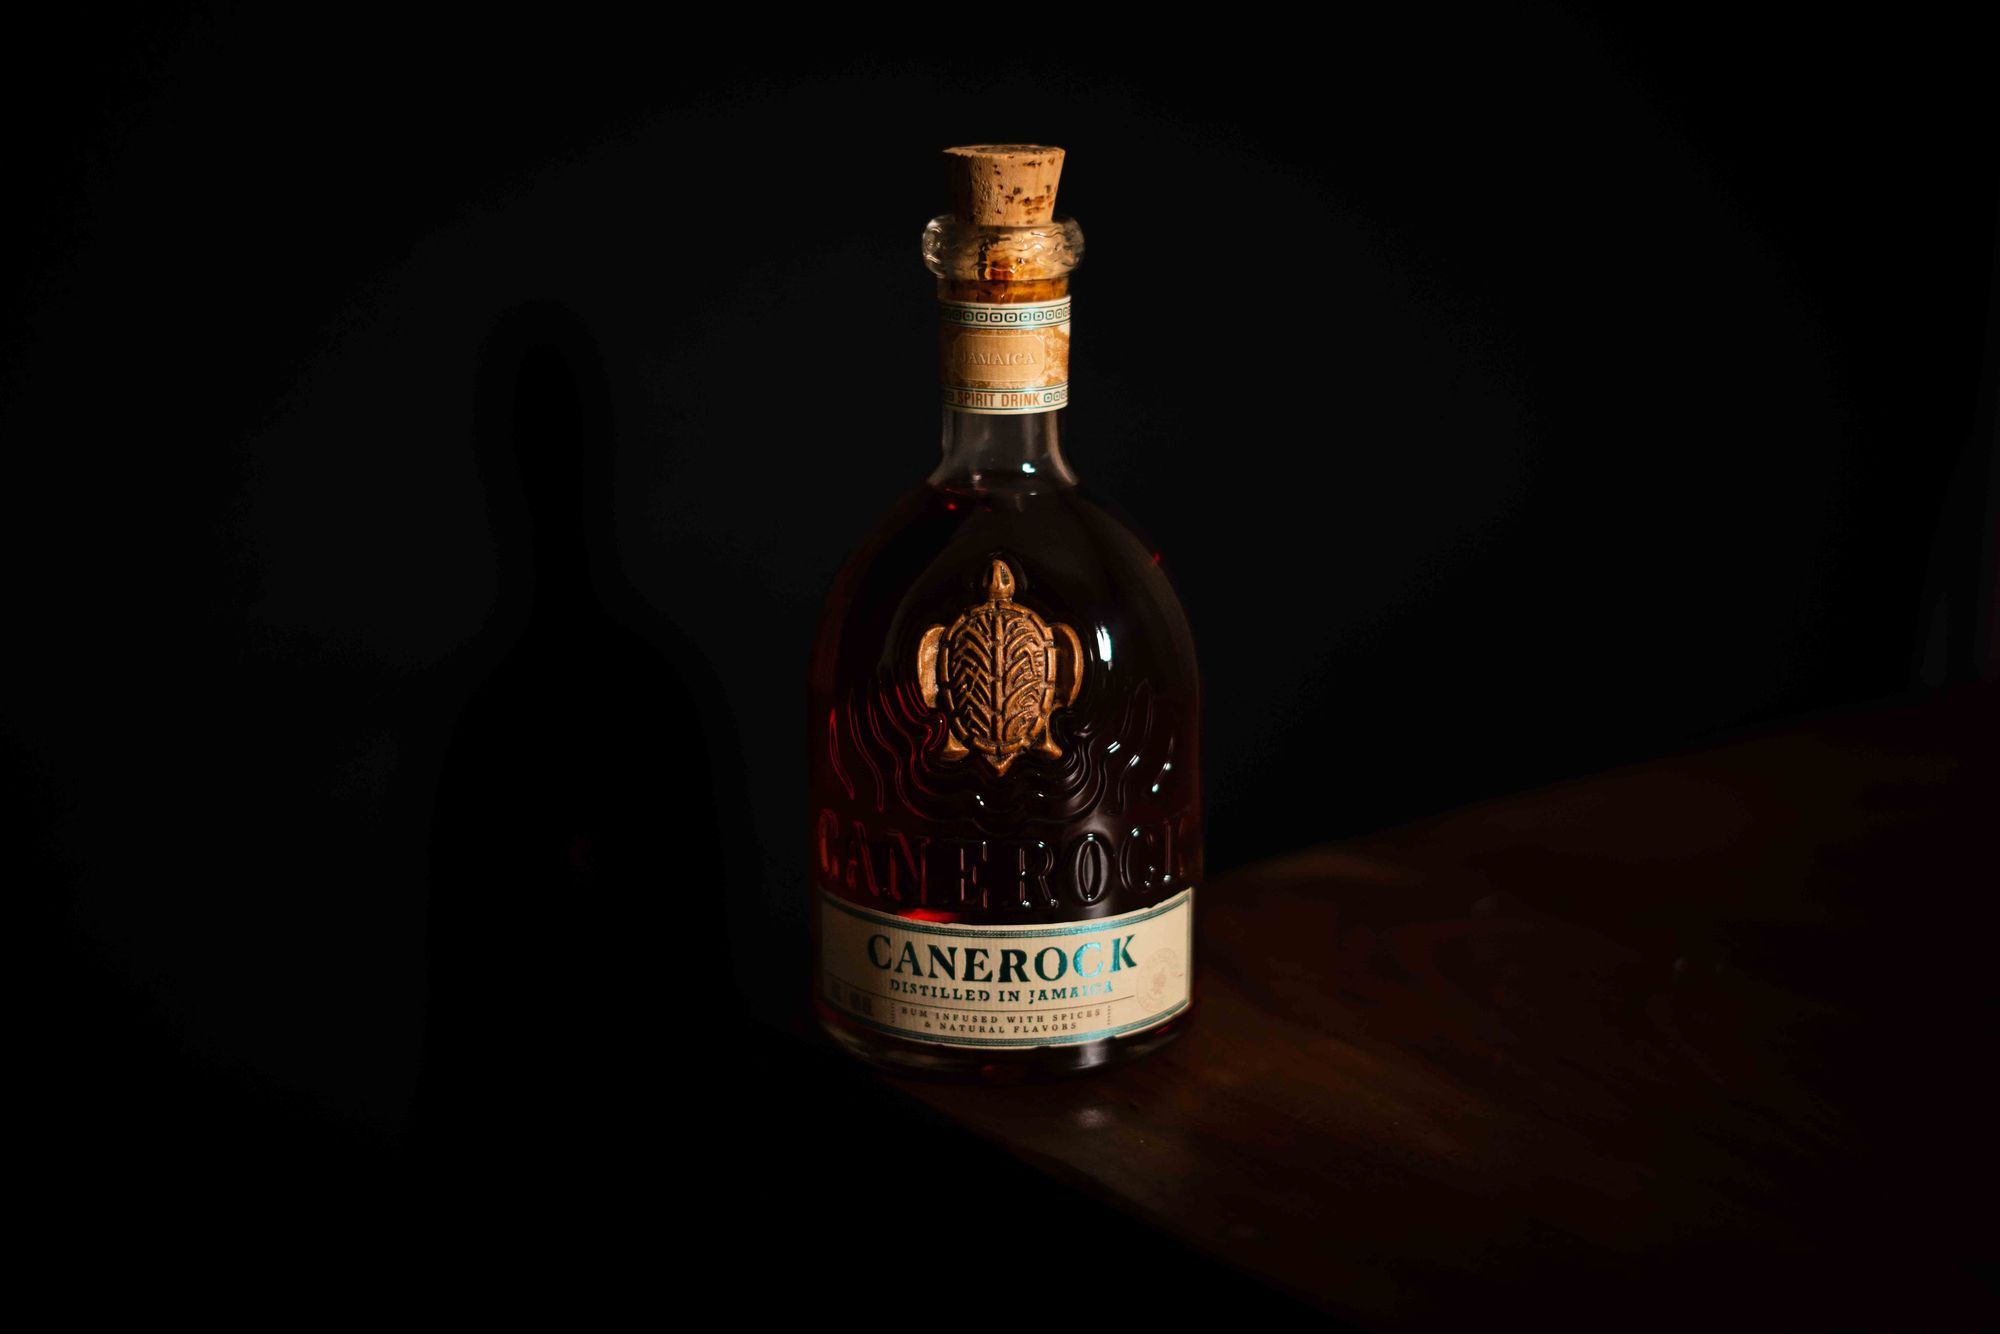 What is Canerock? Inside the new spiced rum release from Maison Ferrand